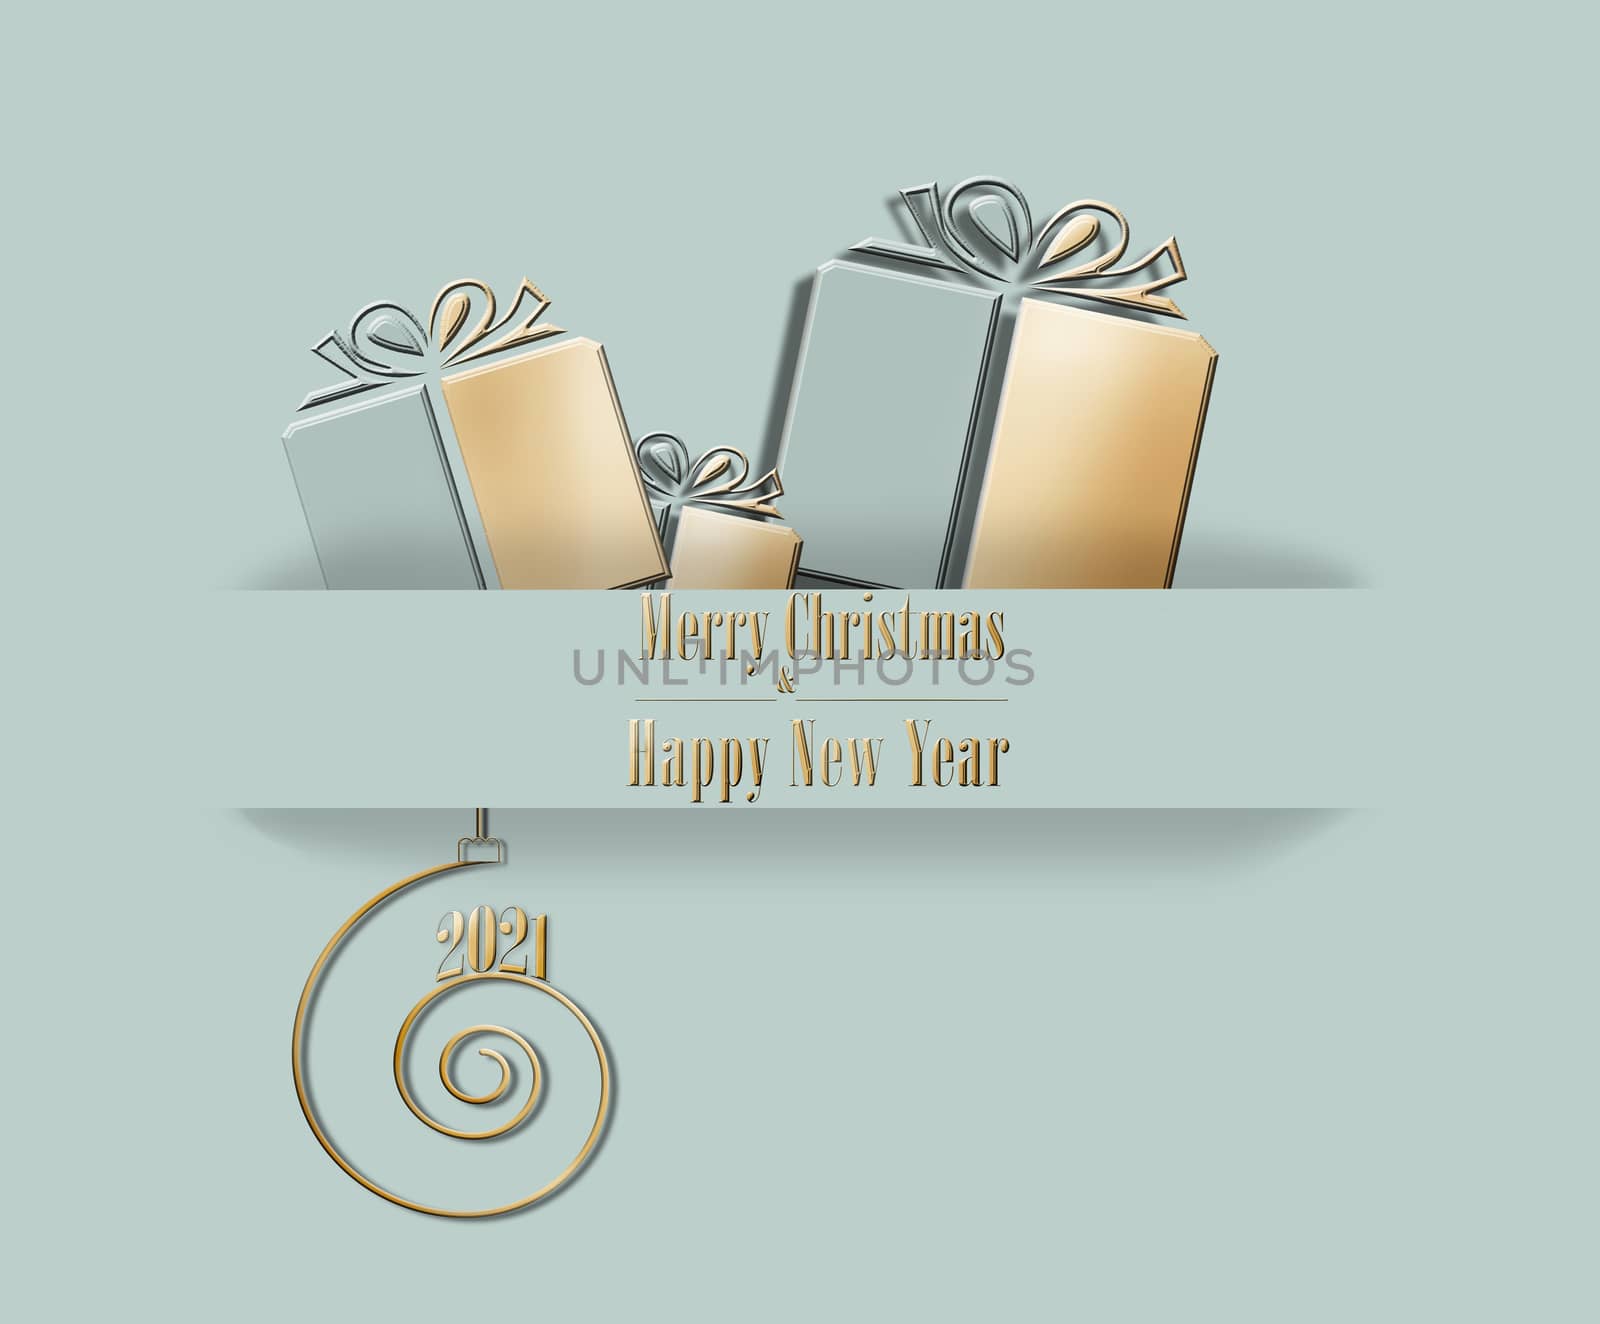 Elegant luxury 2021 Merry Christmas Happy New Year card in pastel green colour by NelliPolk